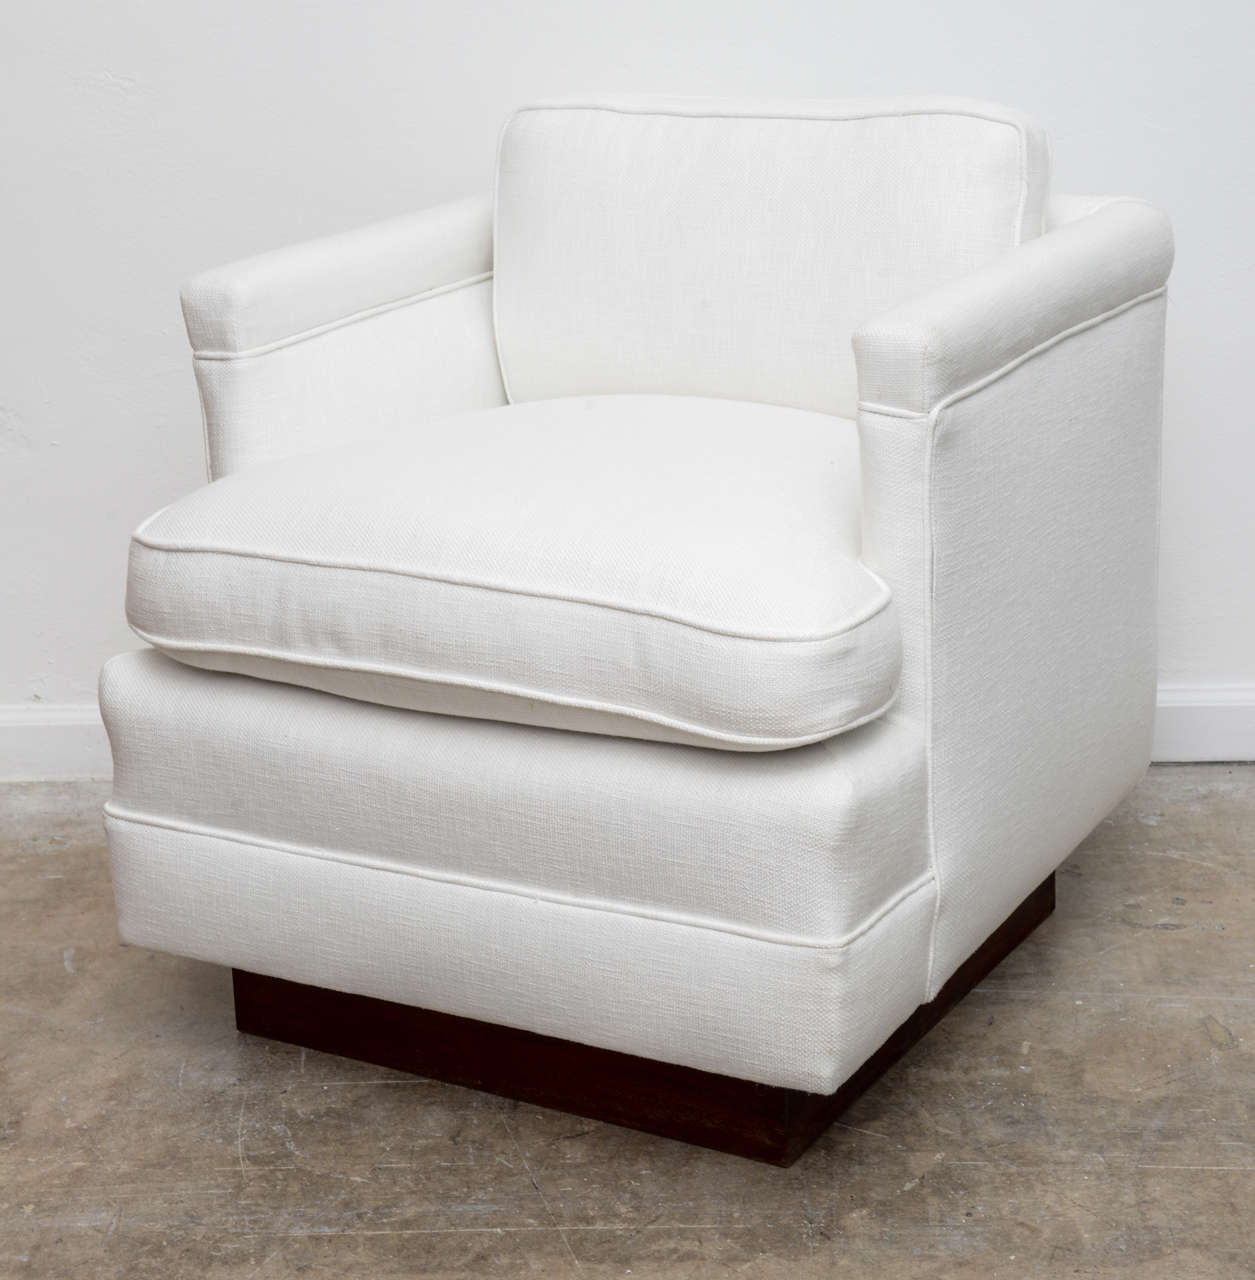 These 1940,s swivel chairs have a solid mahogany square base and a memory  return mechanism. These bases have been refinished and the chairs have been reupholstered in a white linen blend. They are spectacular and would look beautiful with a modern